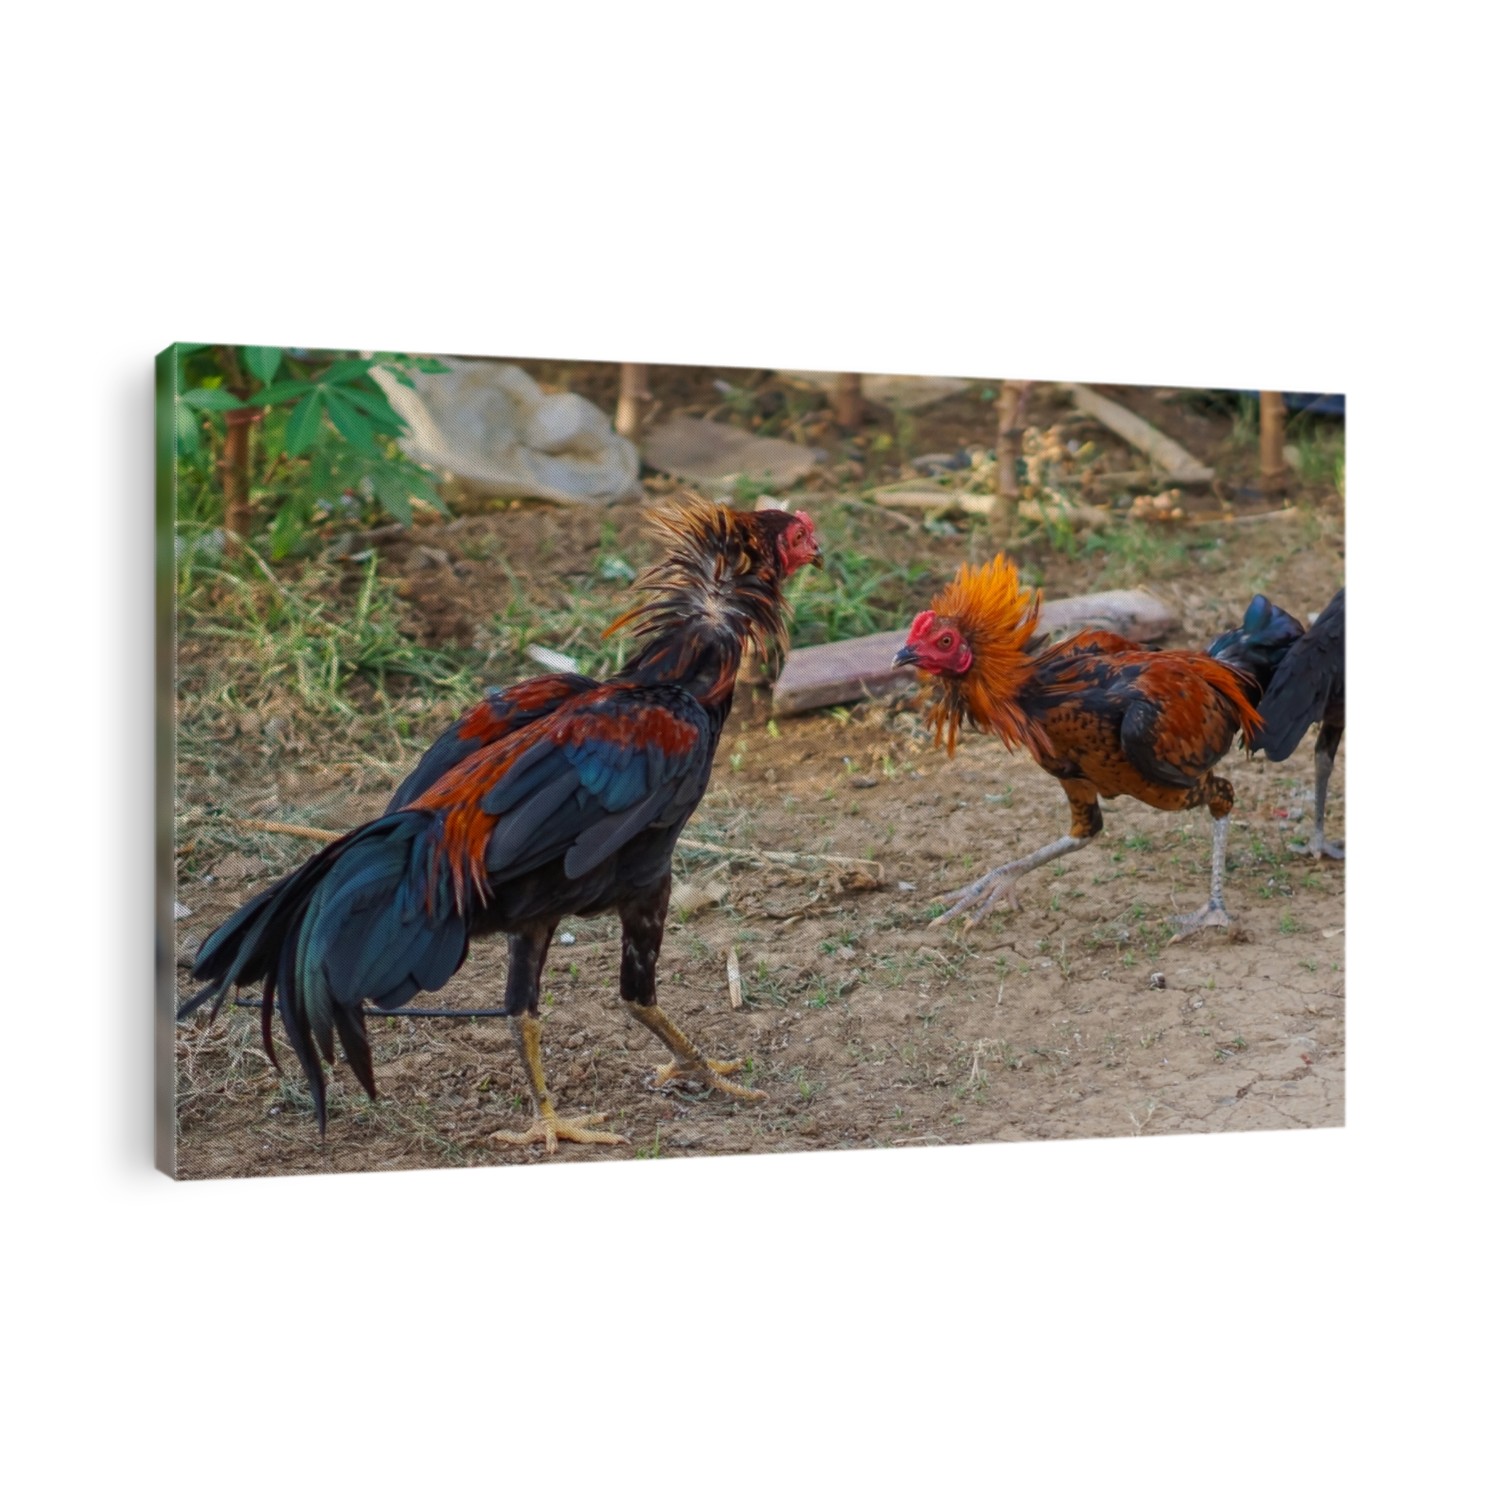 Two colorful roosters fighting in the yard